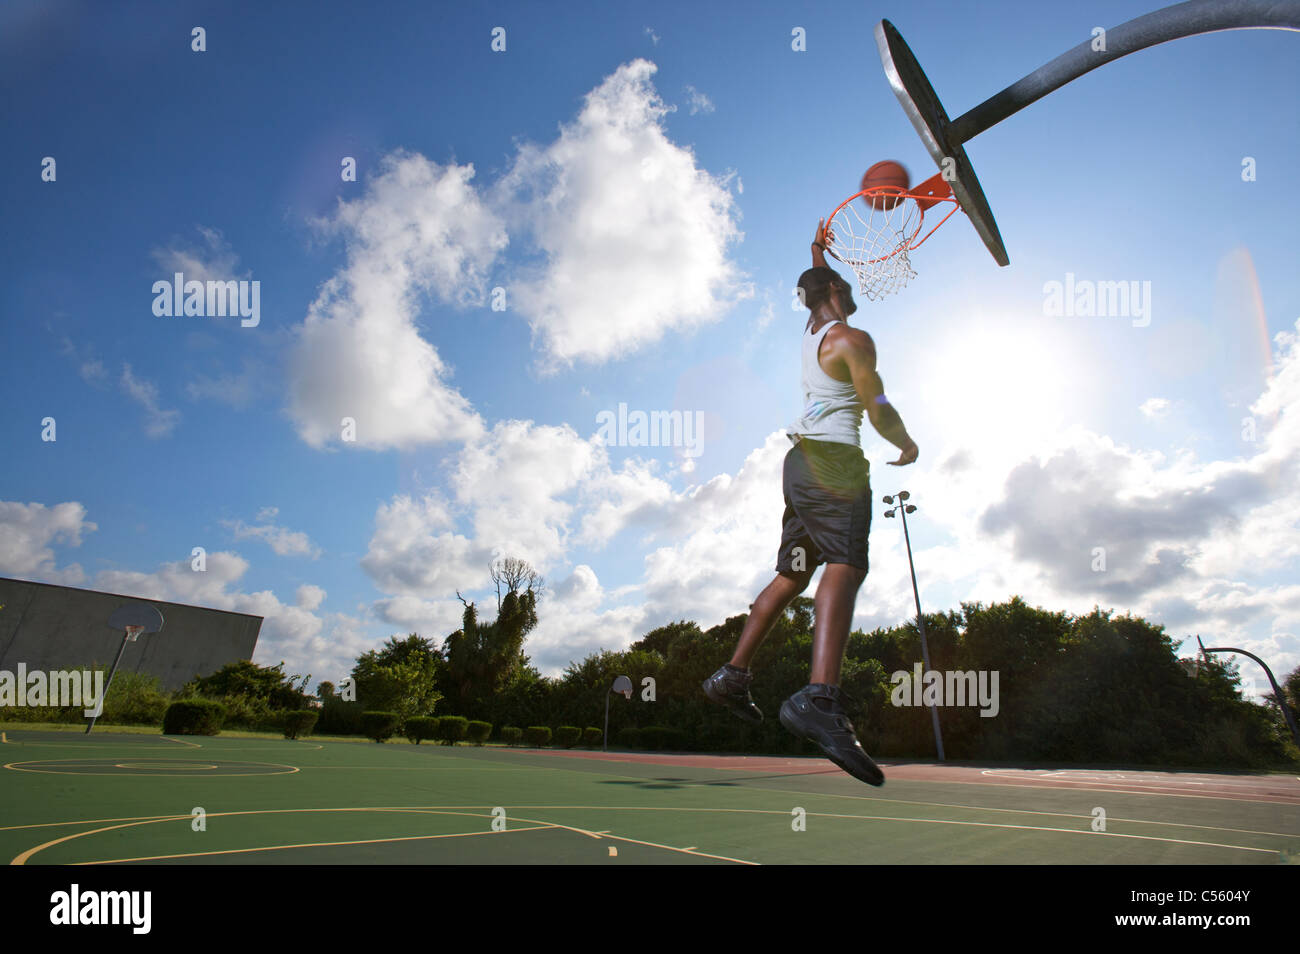 male making slam dunk during outdoor basketball game, upward view Stock Photo